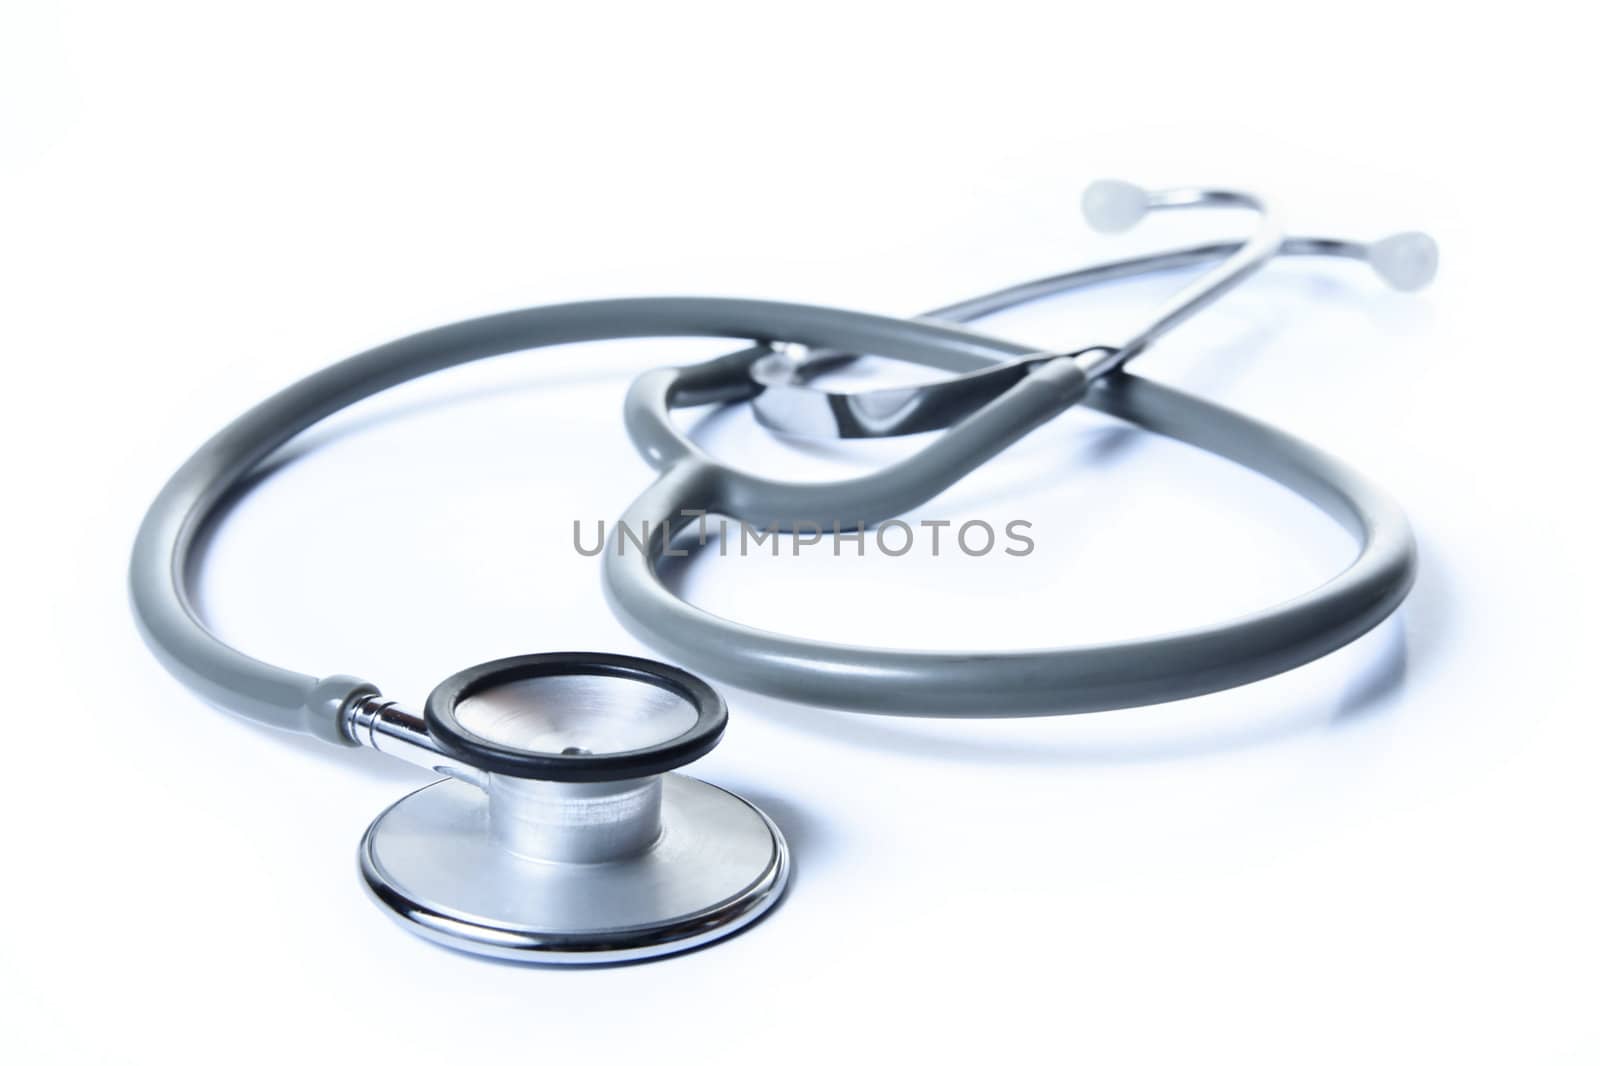 Stethoscope by photosoup